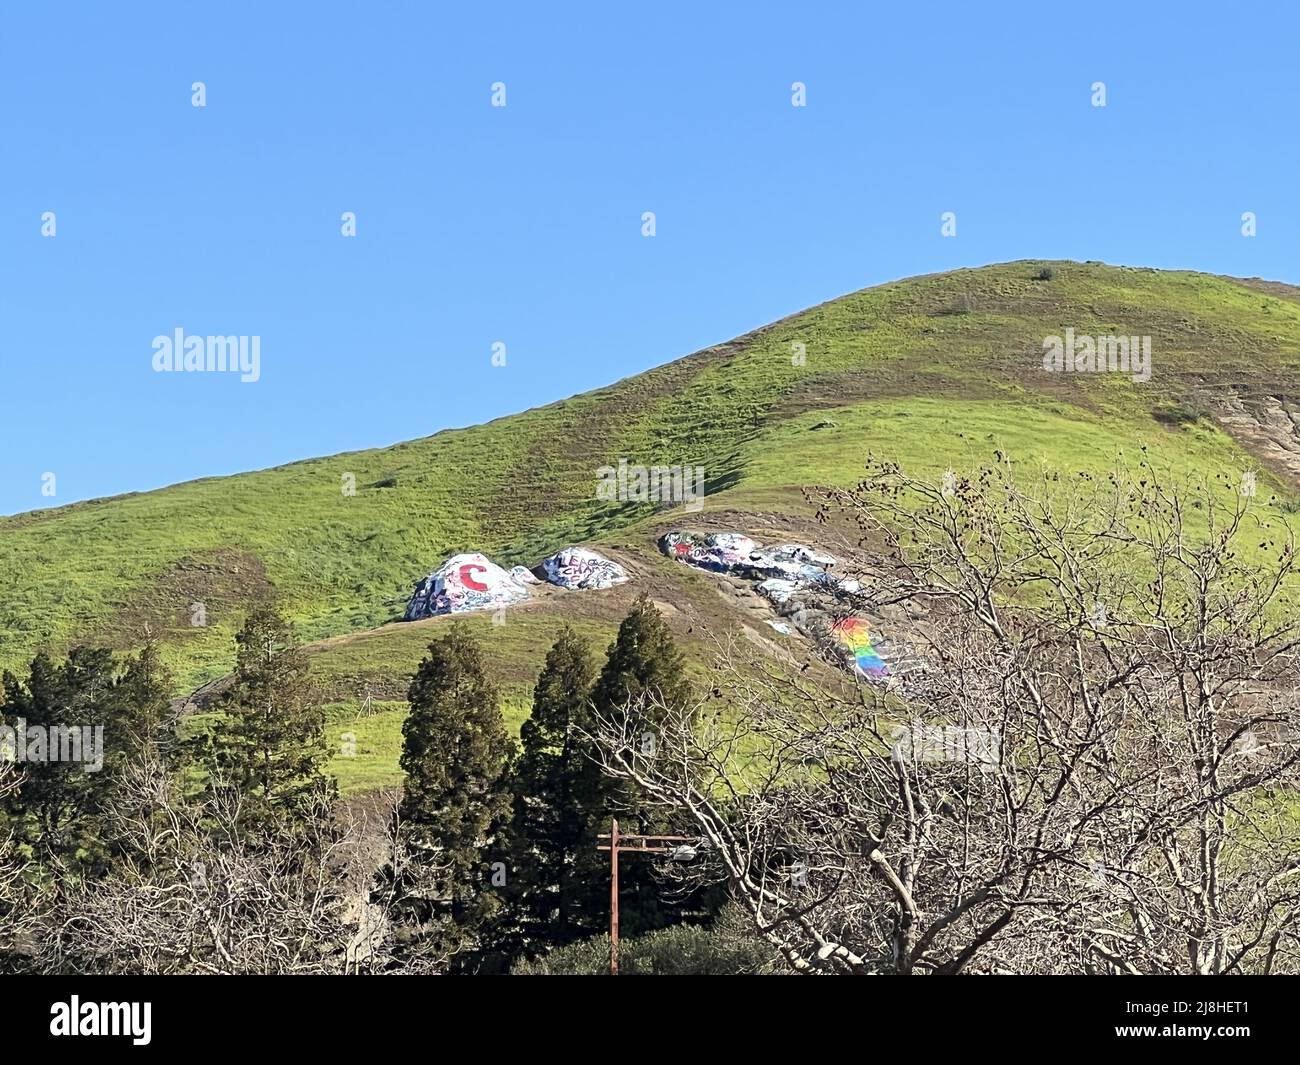 Painted rocks are visible on a hillside above Moraga, California, February 19, 2022. In a local tradition, people paint the rocks with slogans related to local sports games and other events. Photo courtesy Sftm. Stock Photo